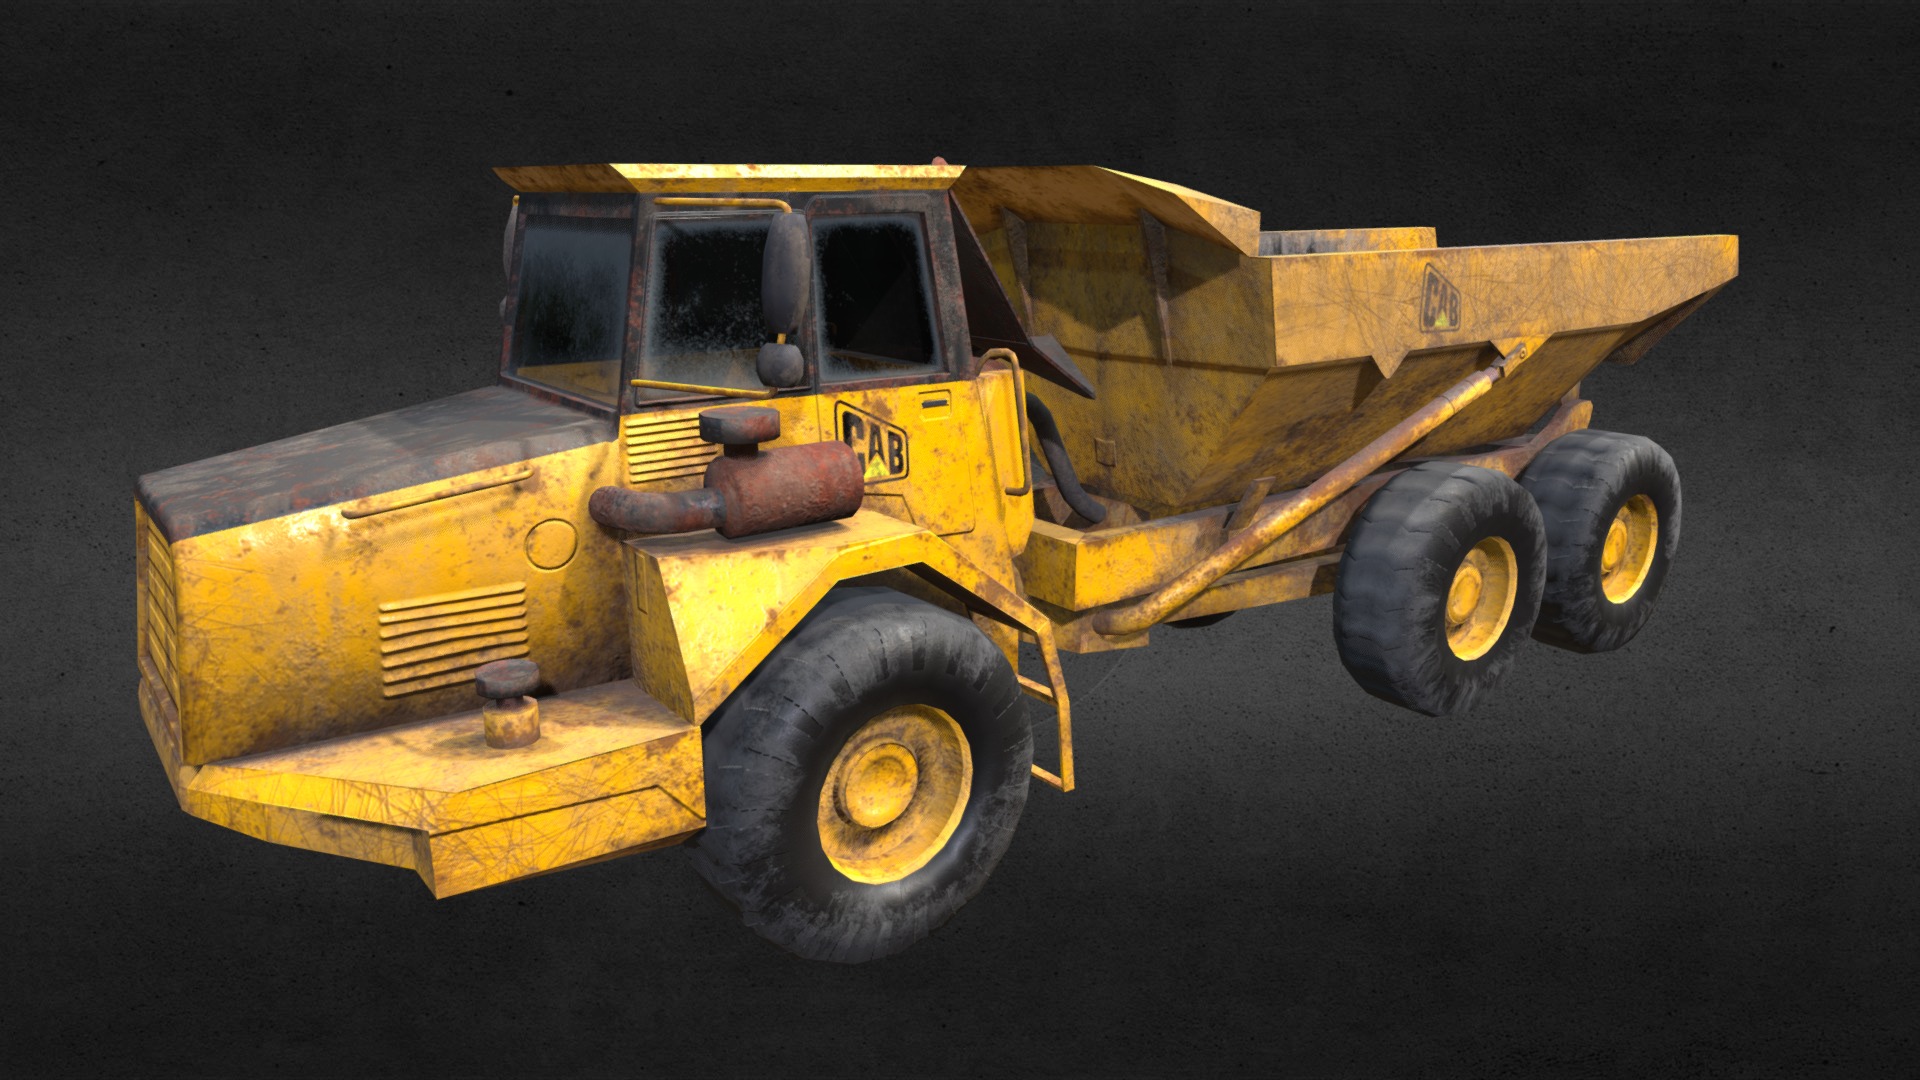 3D model Dumptruck - This is a 3D model of the Dumptruck. The 3D model is about a toy truck on a black background.